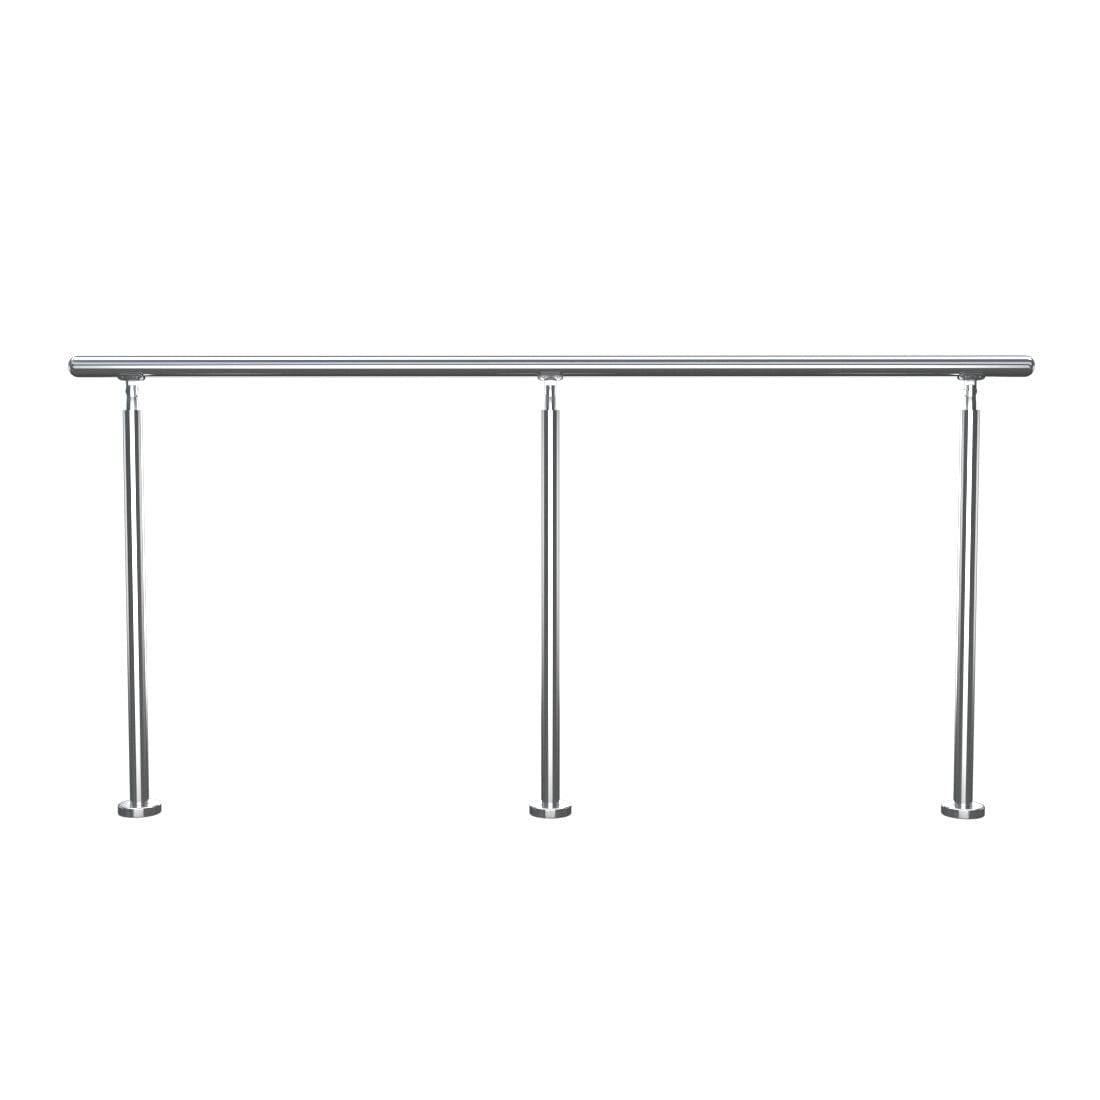 240cm Floor Mount Stainless Steel Handrail for Slopes and Stairs Handrails Living and Home 